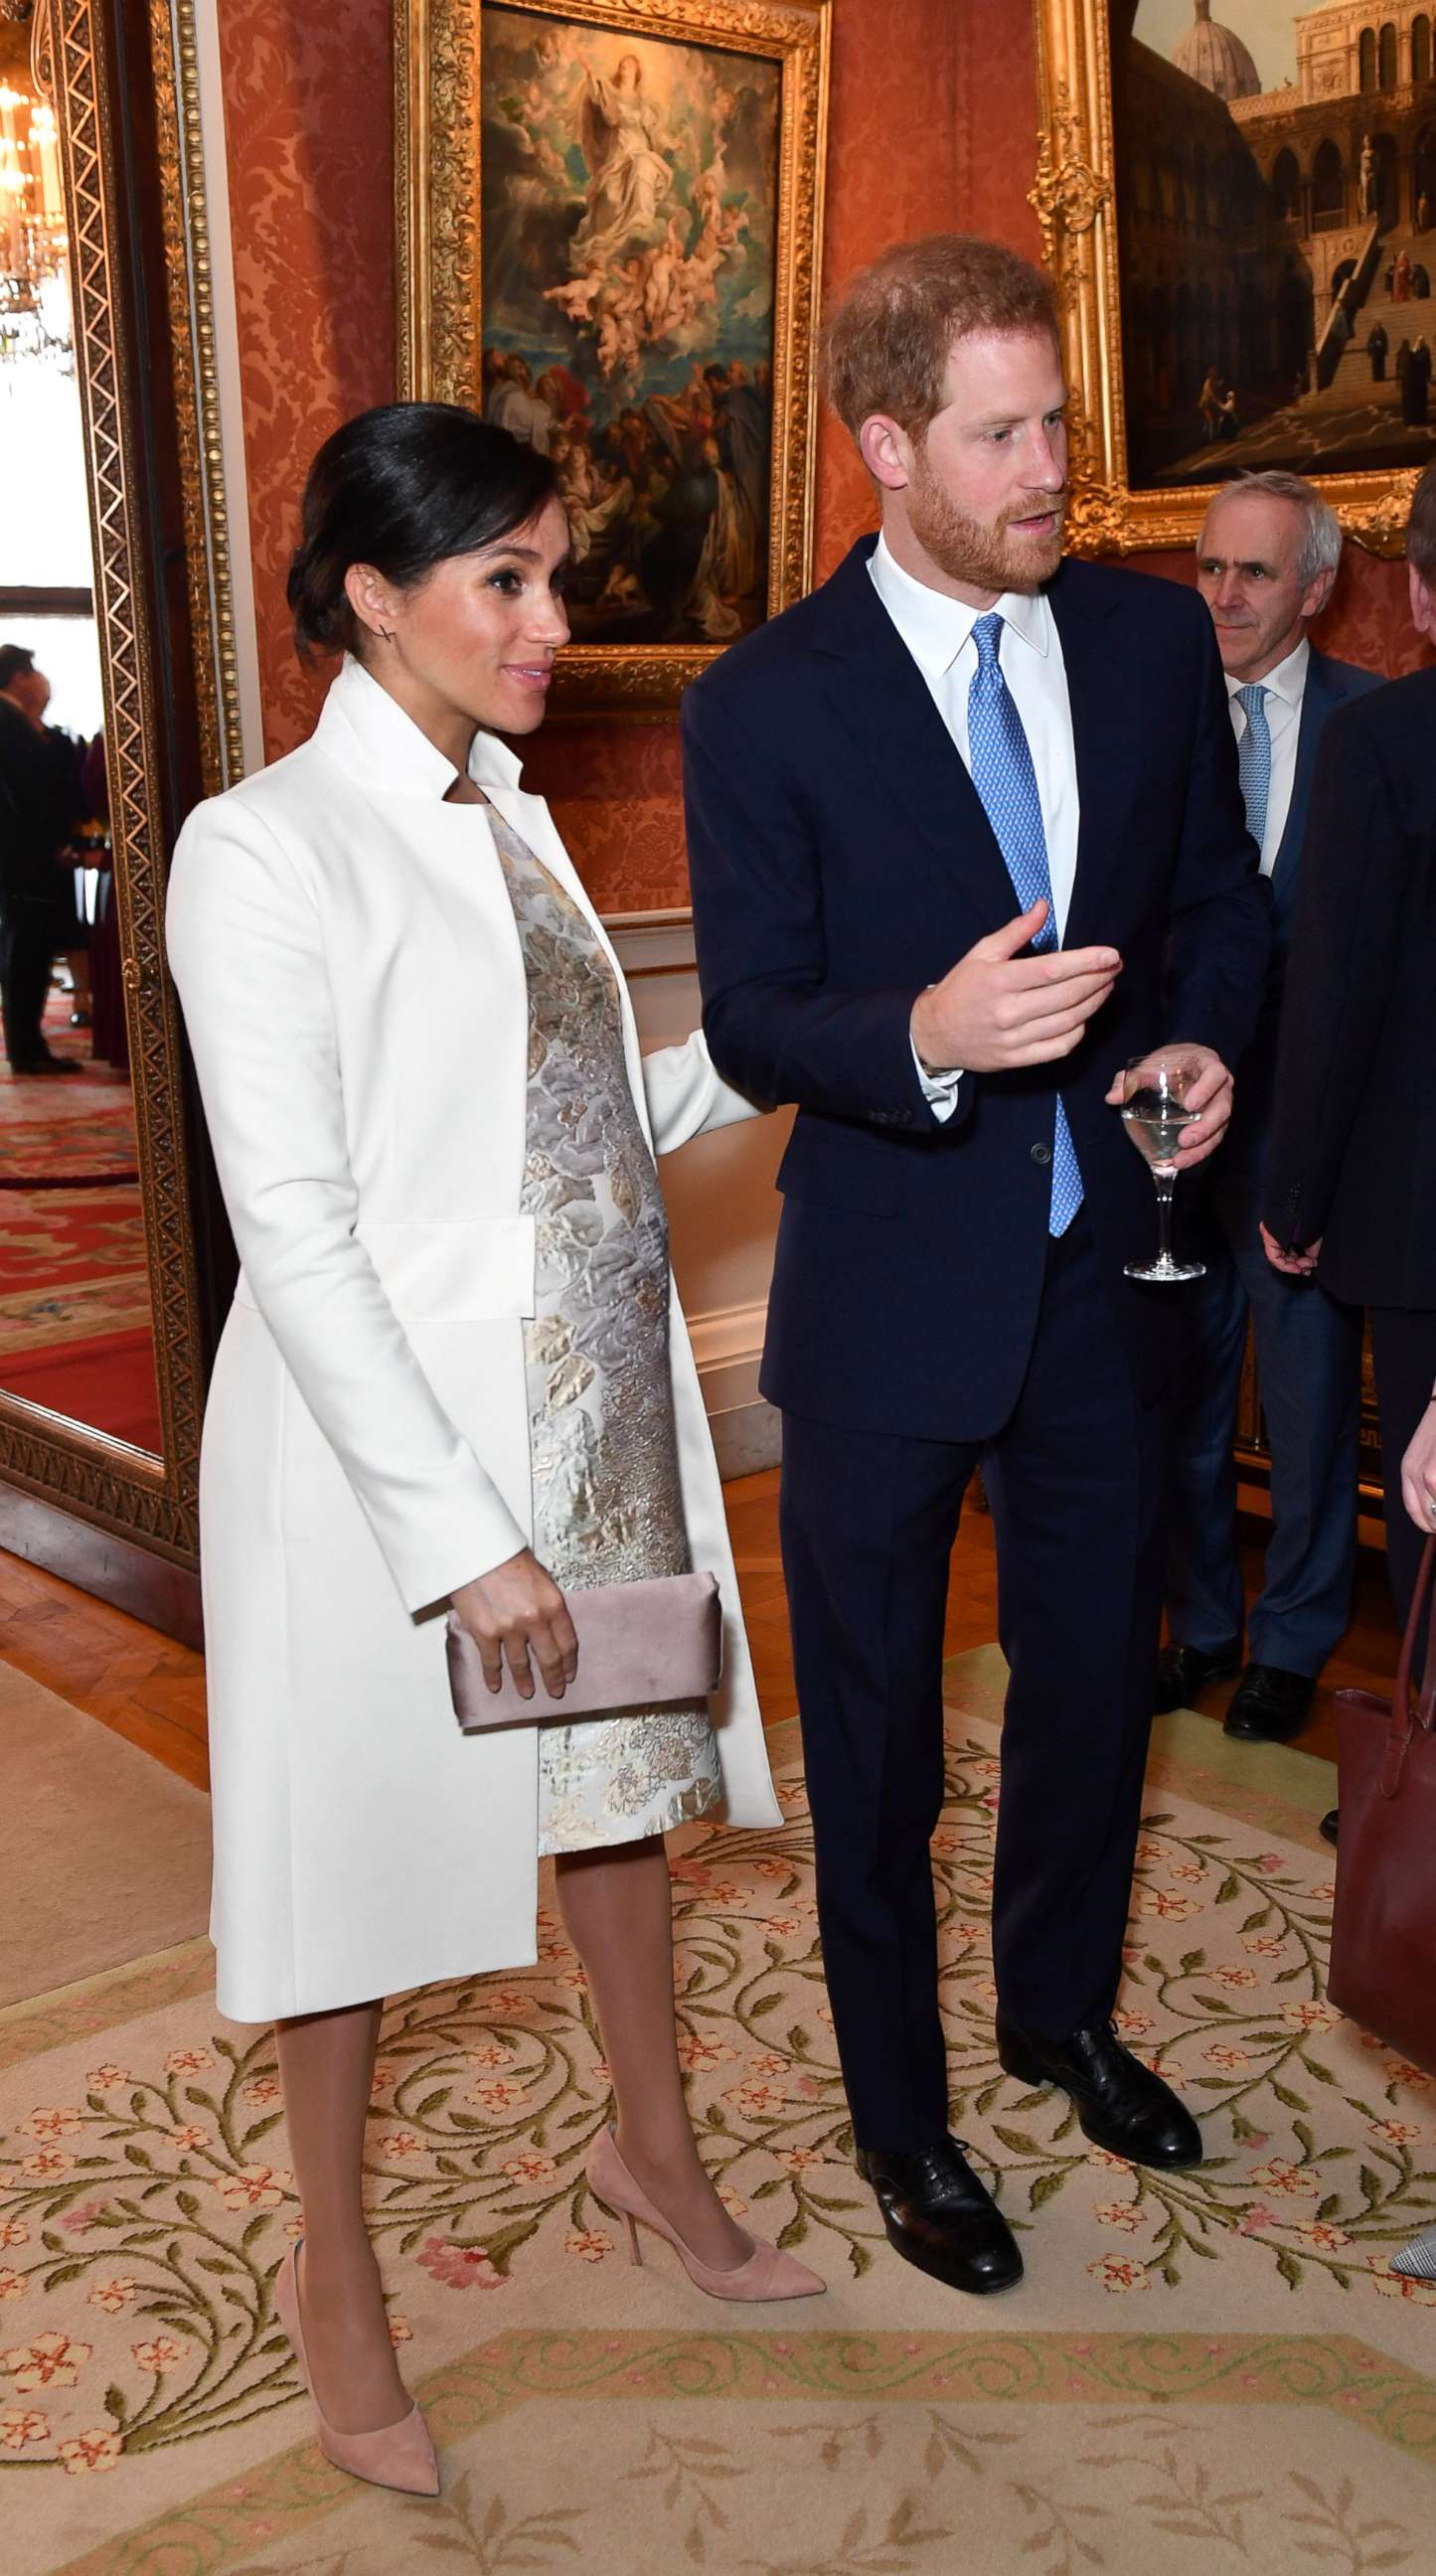 PHOTO: Britain's Meghan, Duchess of Sussex and Prince Harry the Duke of Sussex are seen at a reception to mark the fiftieth anniversary of the investiture of the Prince of Wales at Buckingham Palace in London, March 5, 2019.